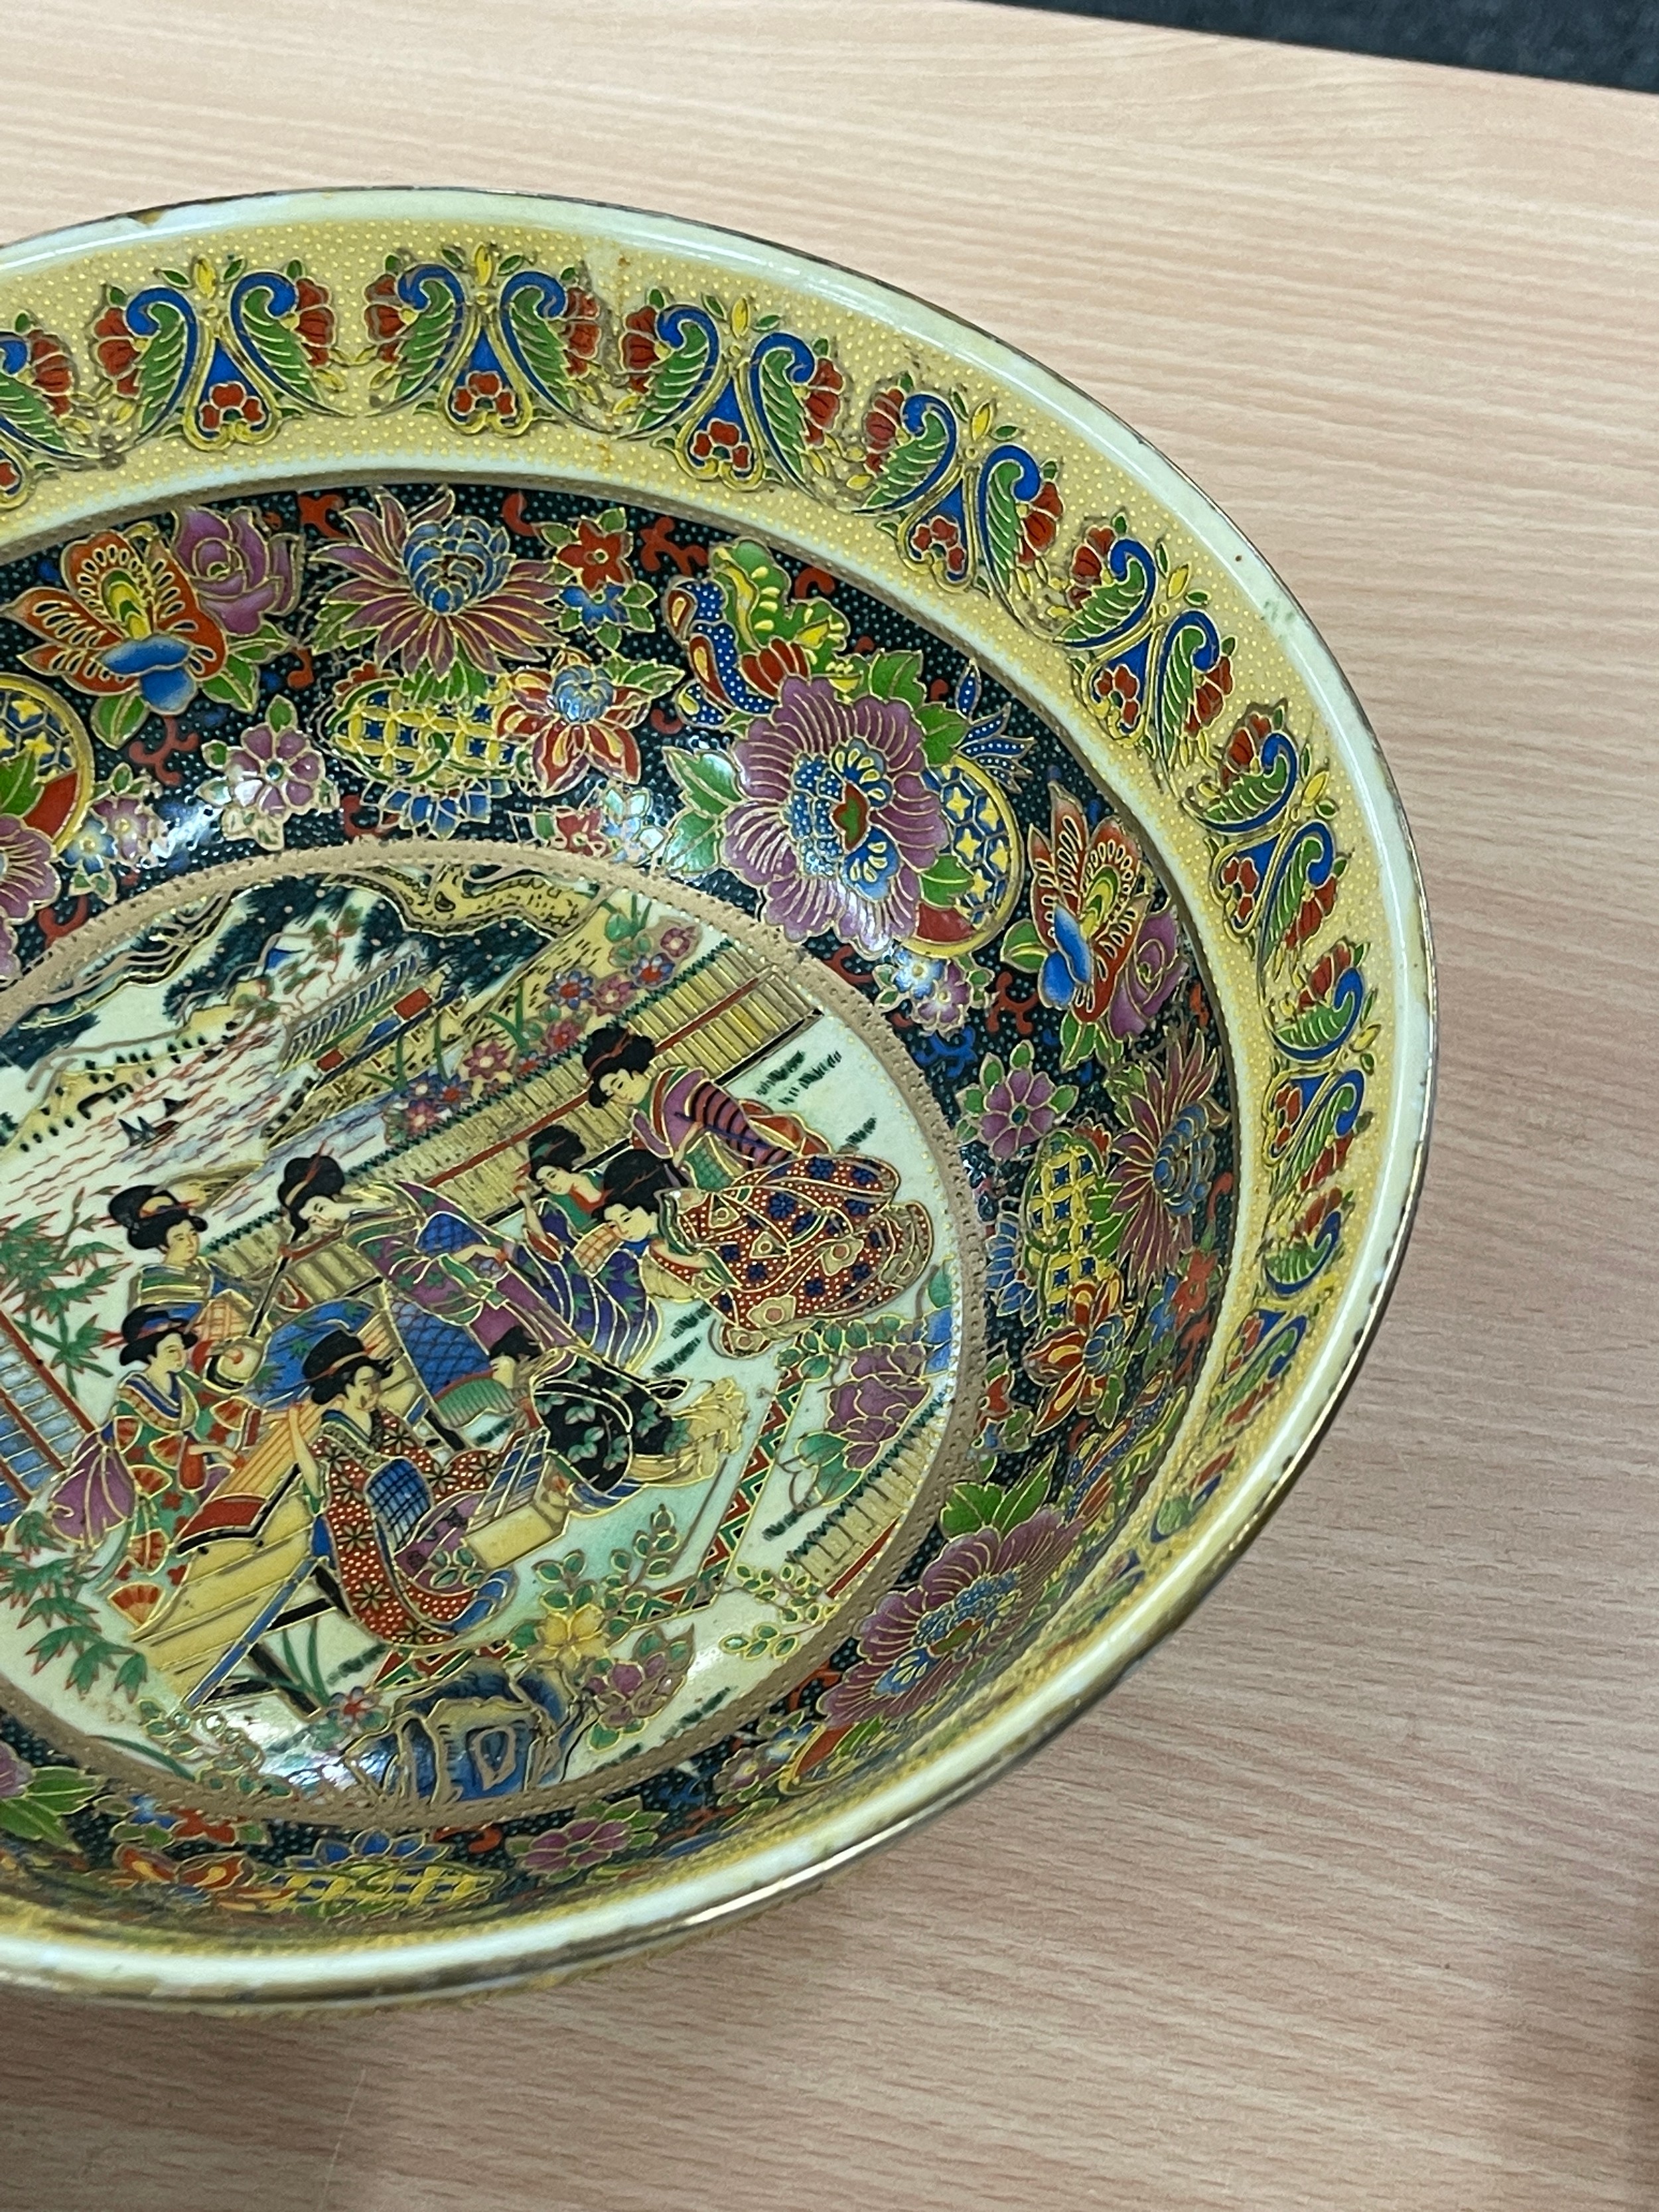 2 Japanese hand painted bowls, largest measures approximately 10 inches diameter 4.5 inches tall - Image 3 of 8